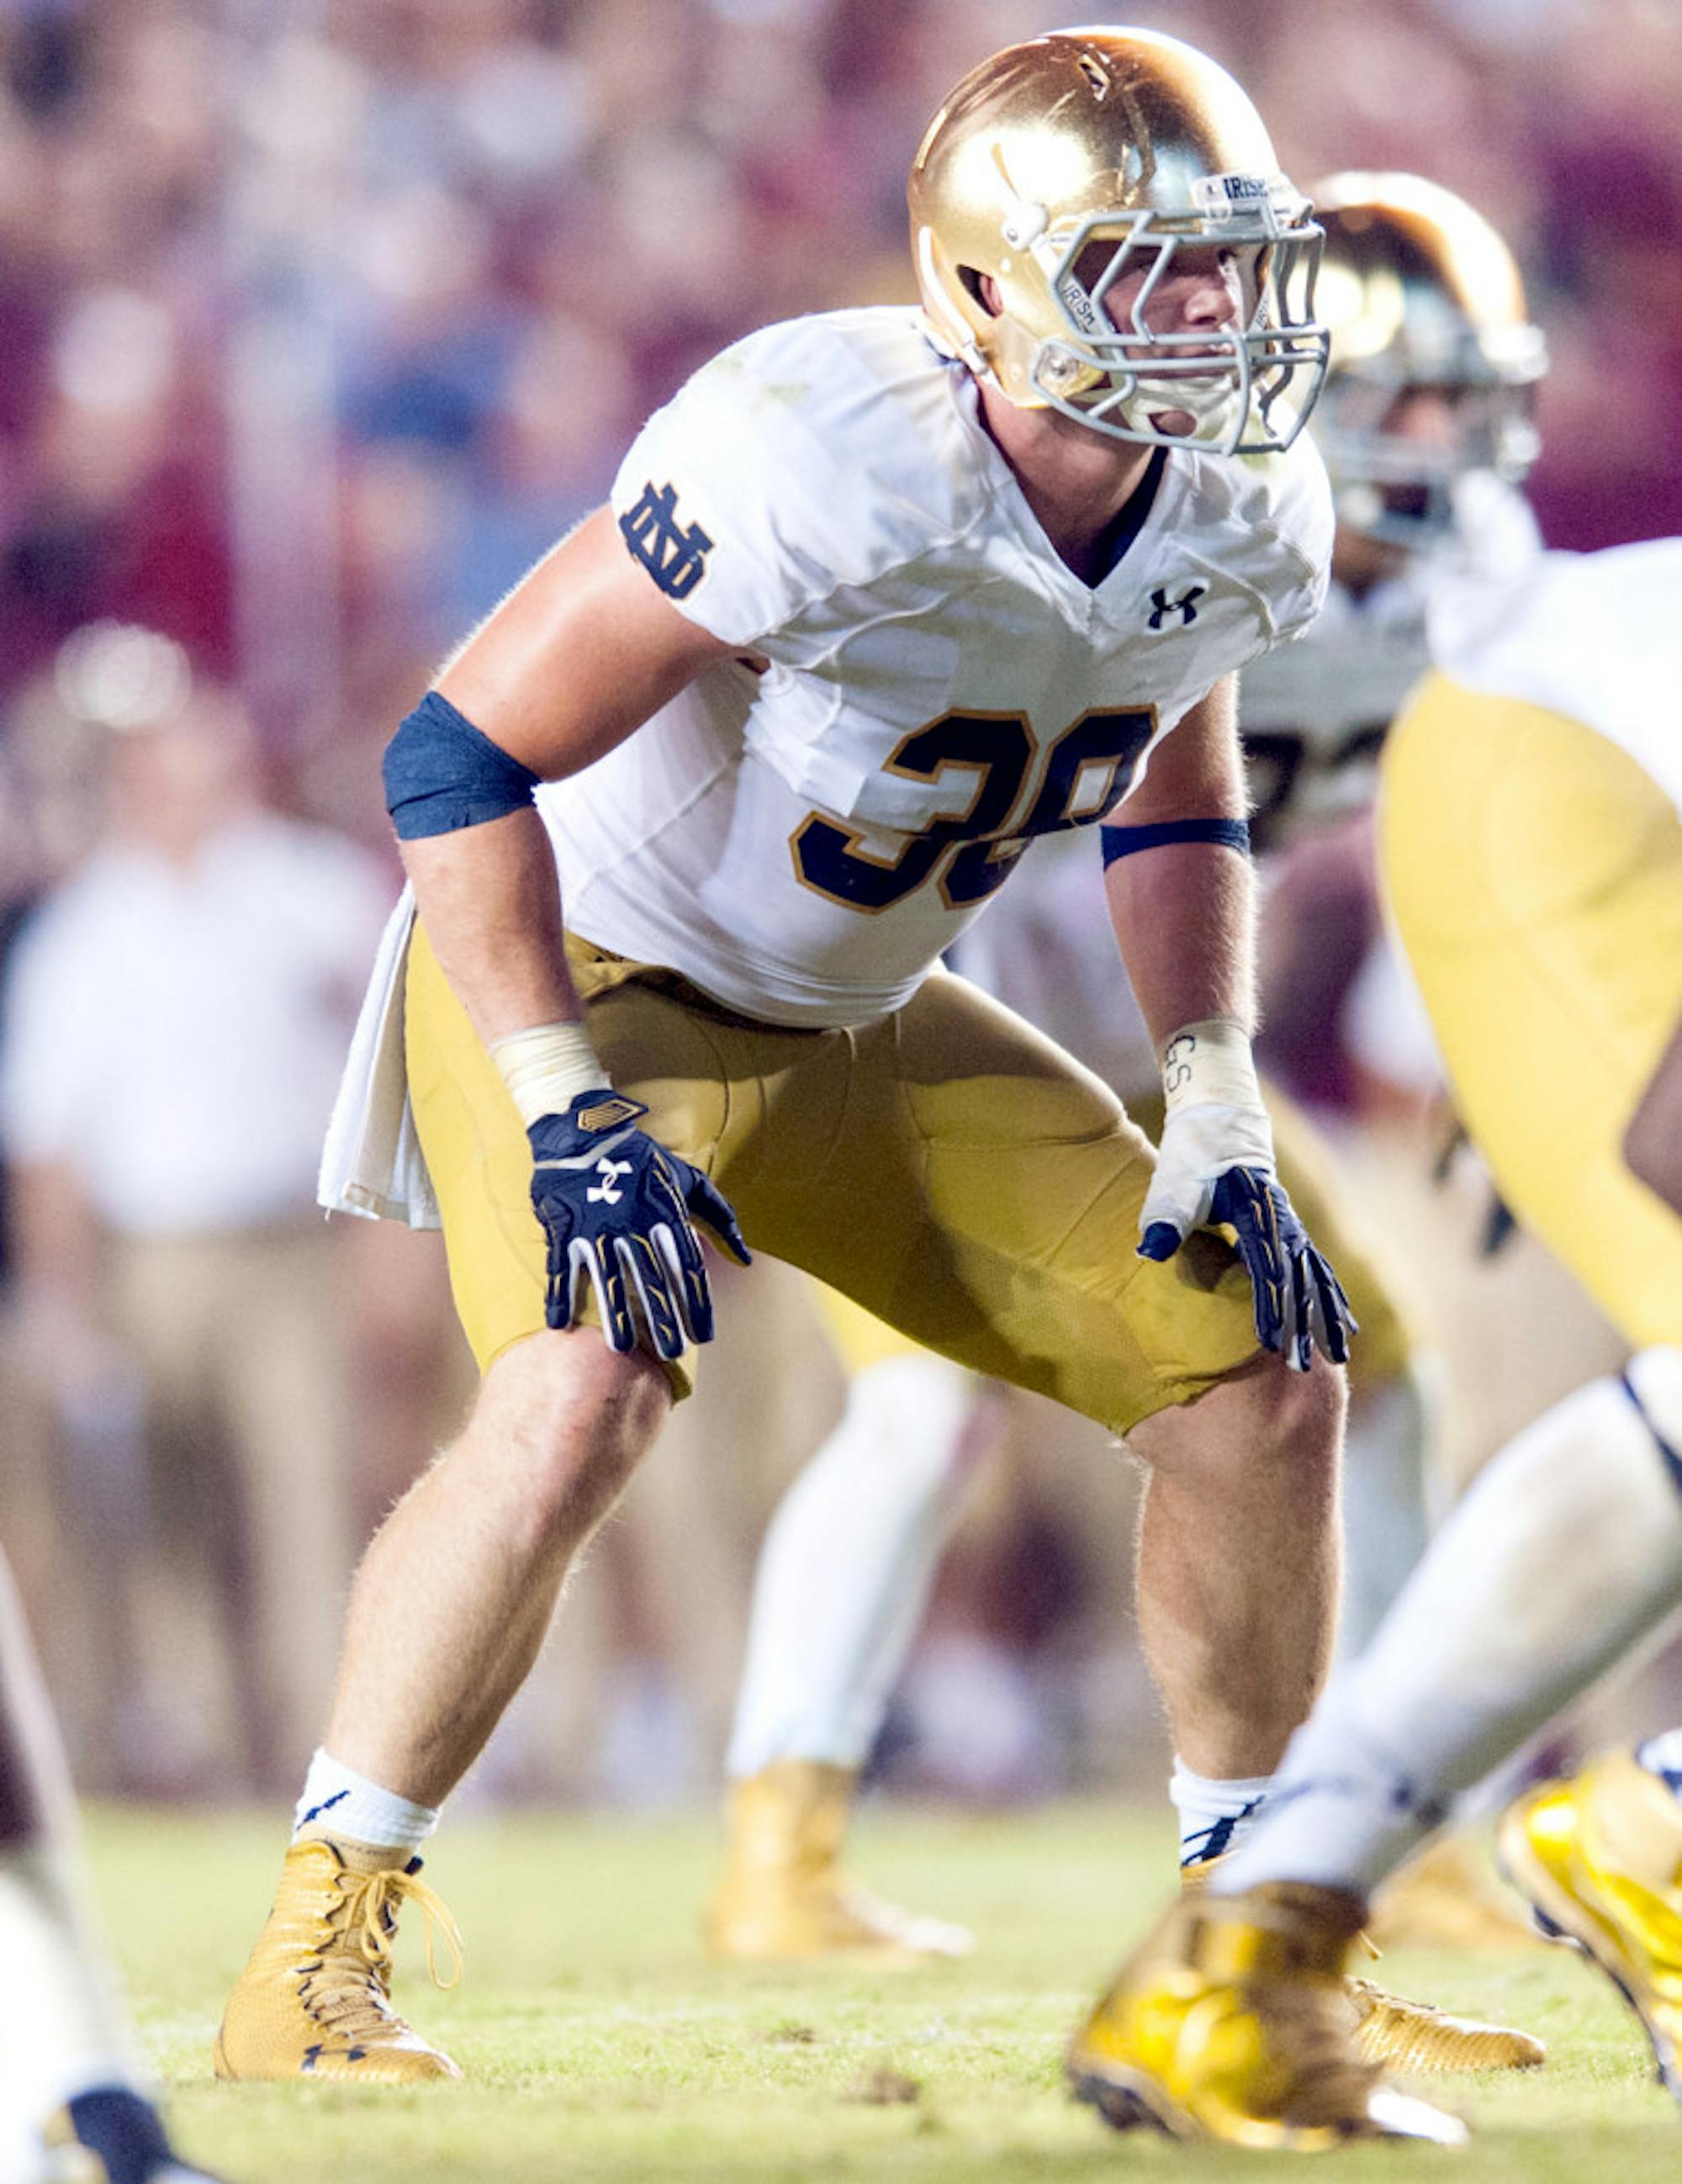 Irish senior linebacker Joe Schmidt is out for the season with a fractured and dislocated left ankle suffered during Notre Dame’s 49-39 win over Navy on Saturday. Schmidt leads the Irish with 65 tackles.